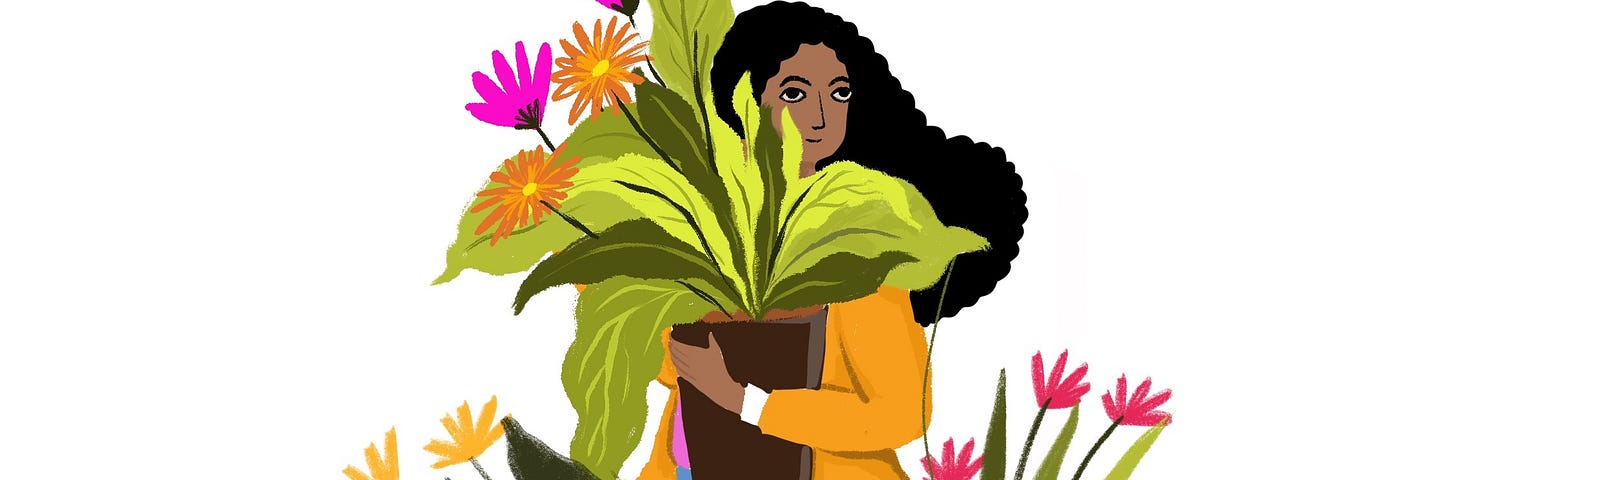 Colourful illustration of a woman holding a plant with big leaves and flowers